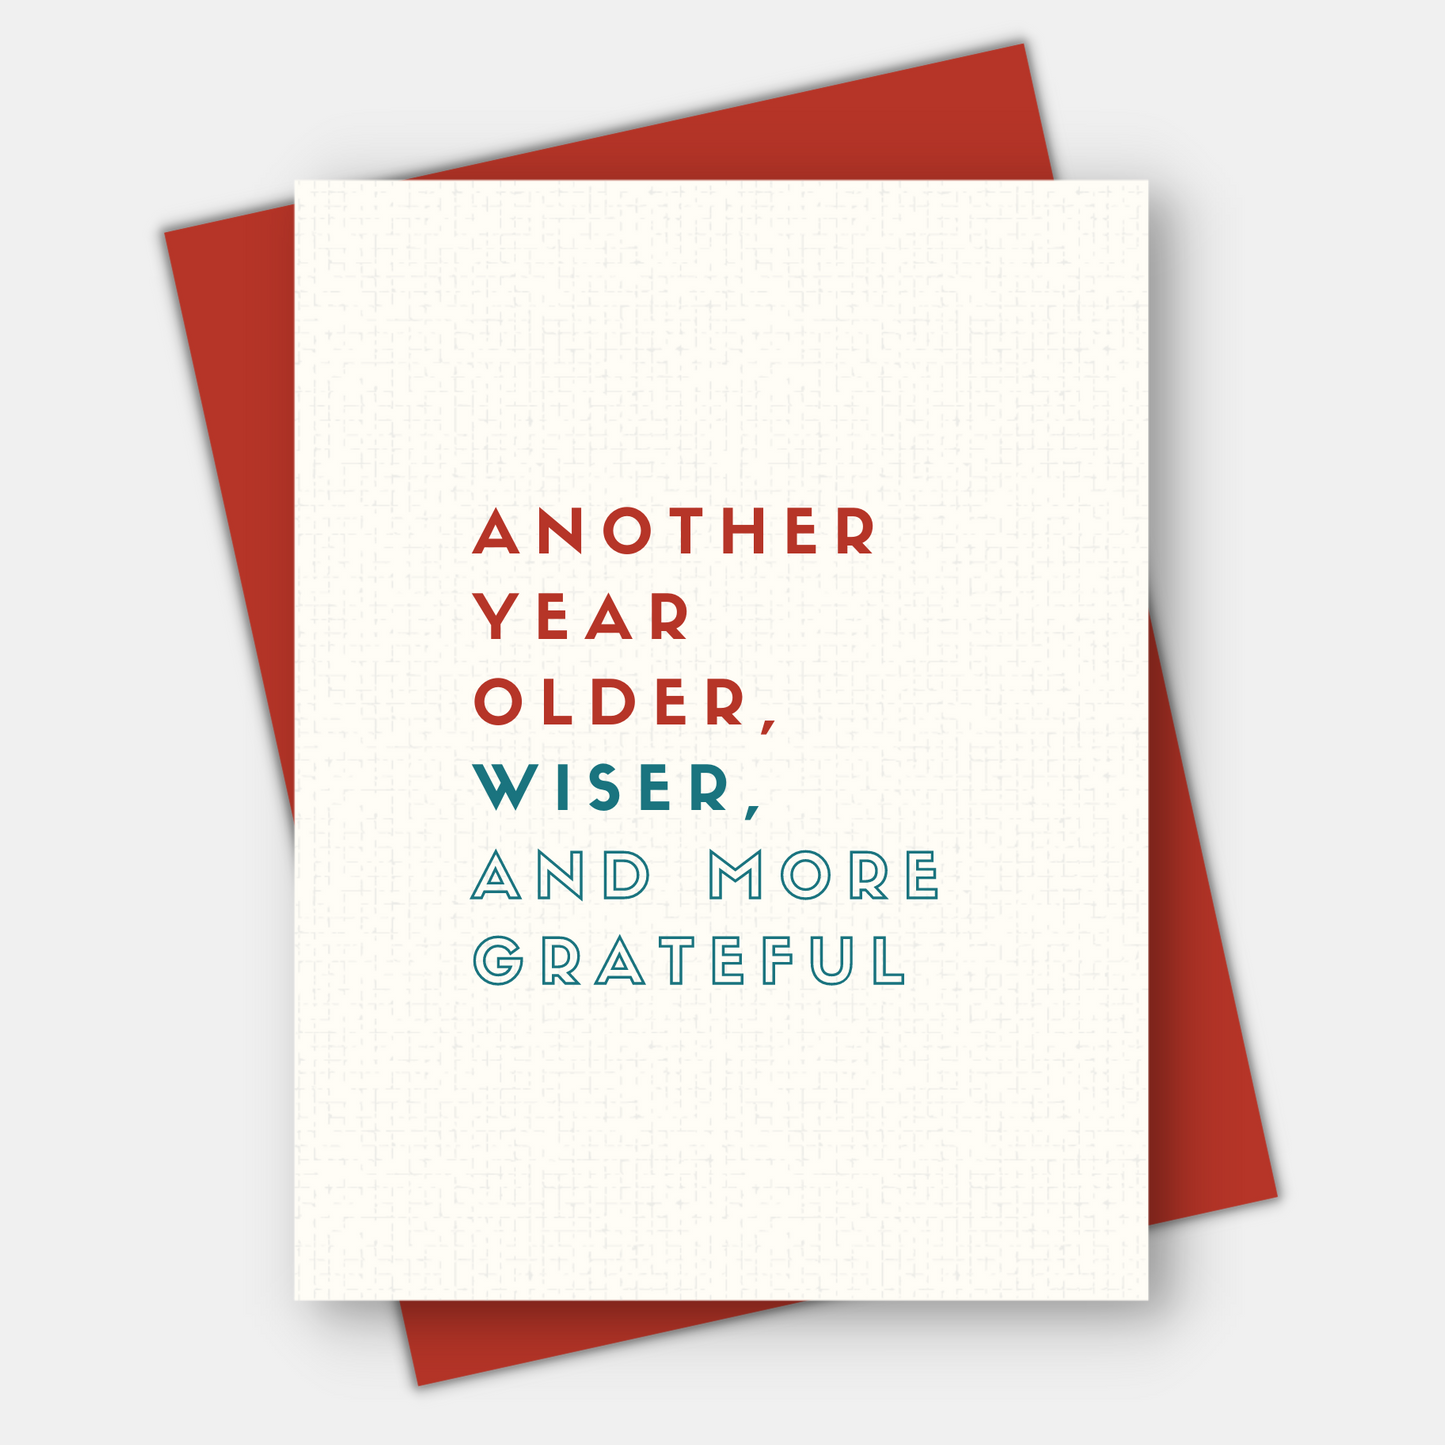 Another Year Older, Wiser, and More Grateful, Age-Positive Birthday Card